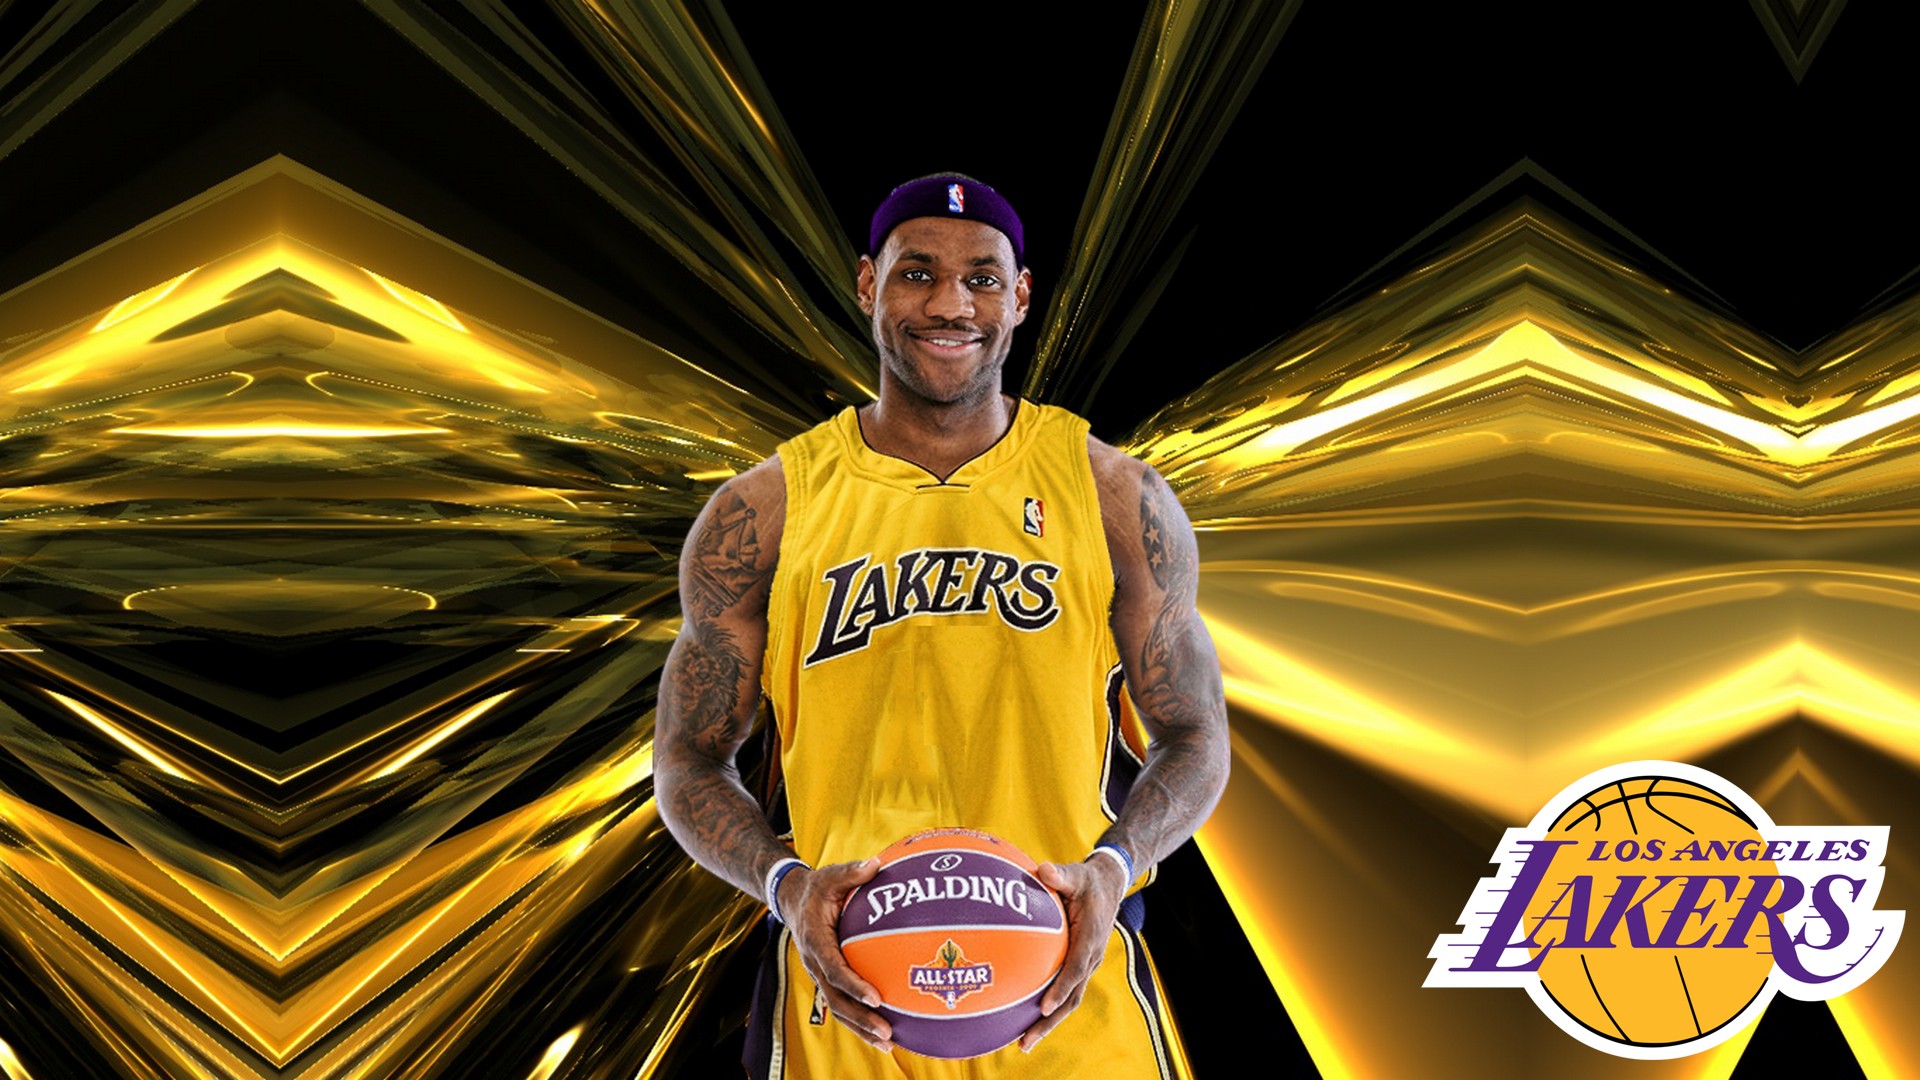 Wallpapers HD LeBron James LA Lakers with image dimensions 1920x1080 pixel. You can make this wallpaper for your Desktop Computer Backgrounds, Windows or Mac Screensavers, iPhone Lock screen, Tablet or Android and another Mobile Phone device